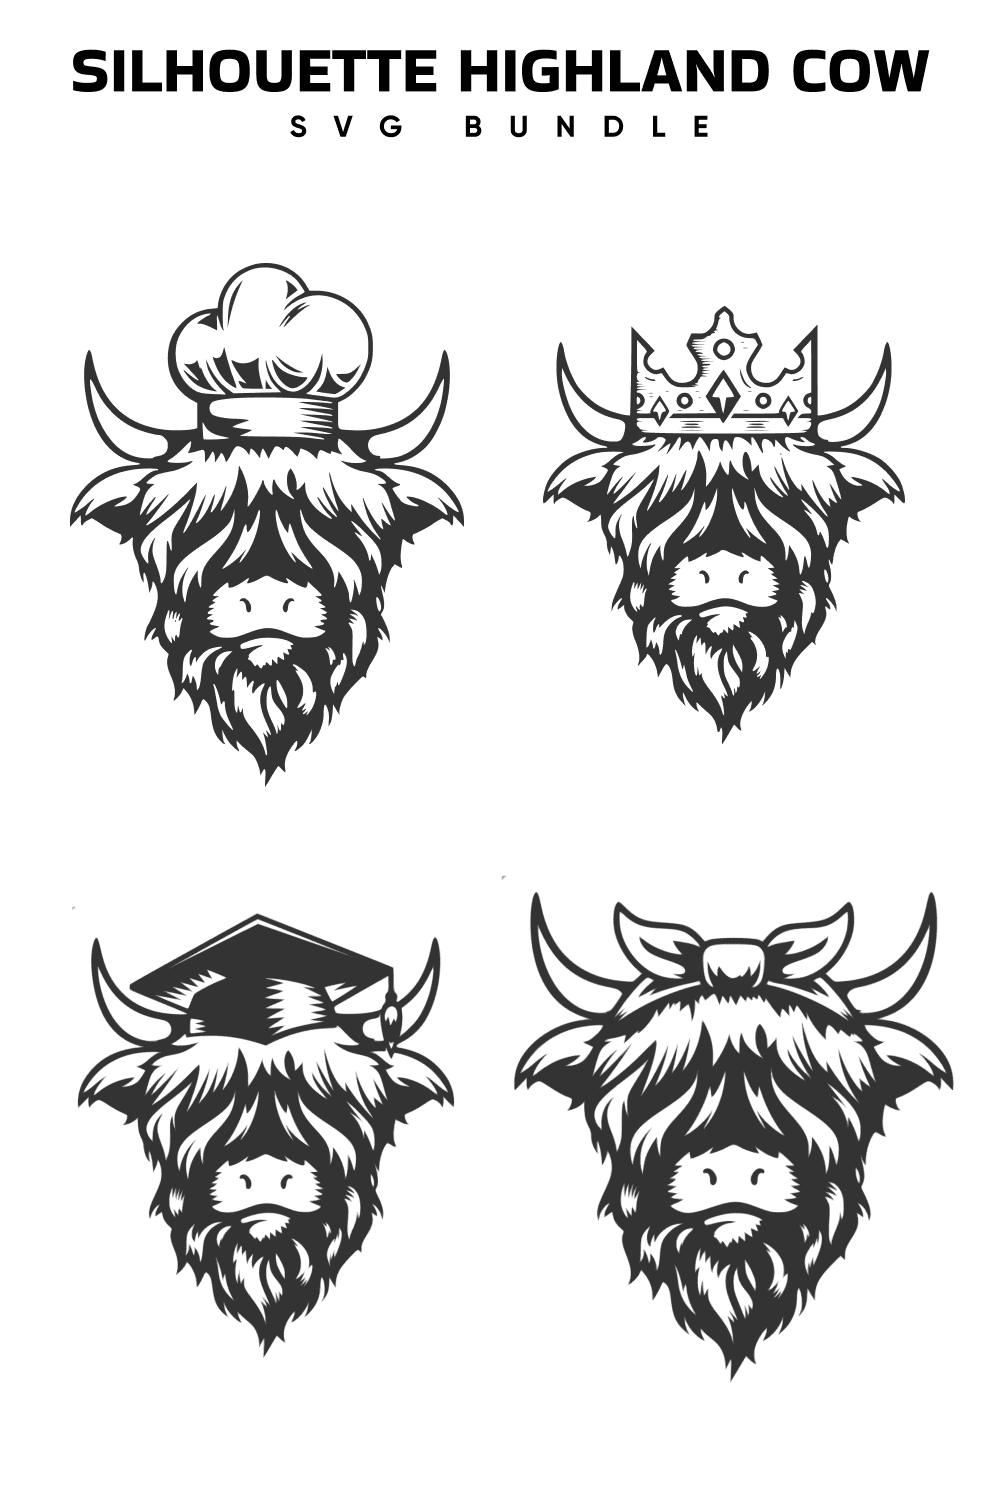 The silhouettes of the head of a bearded man with a crown on his head.